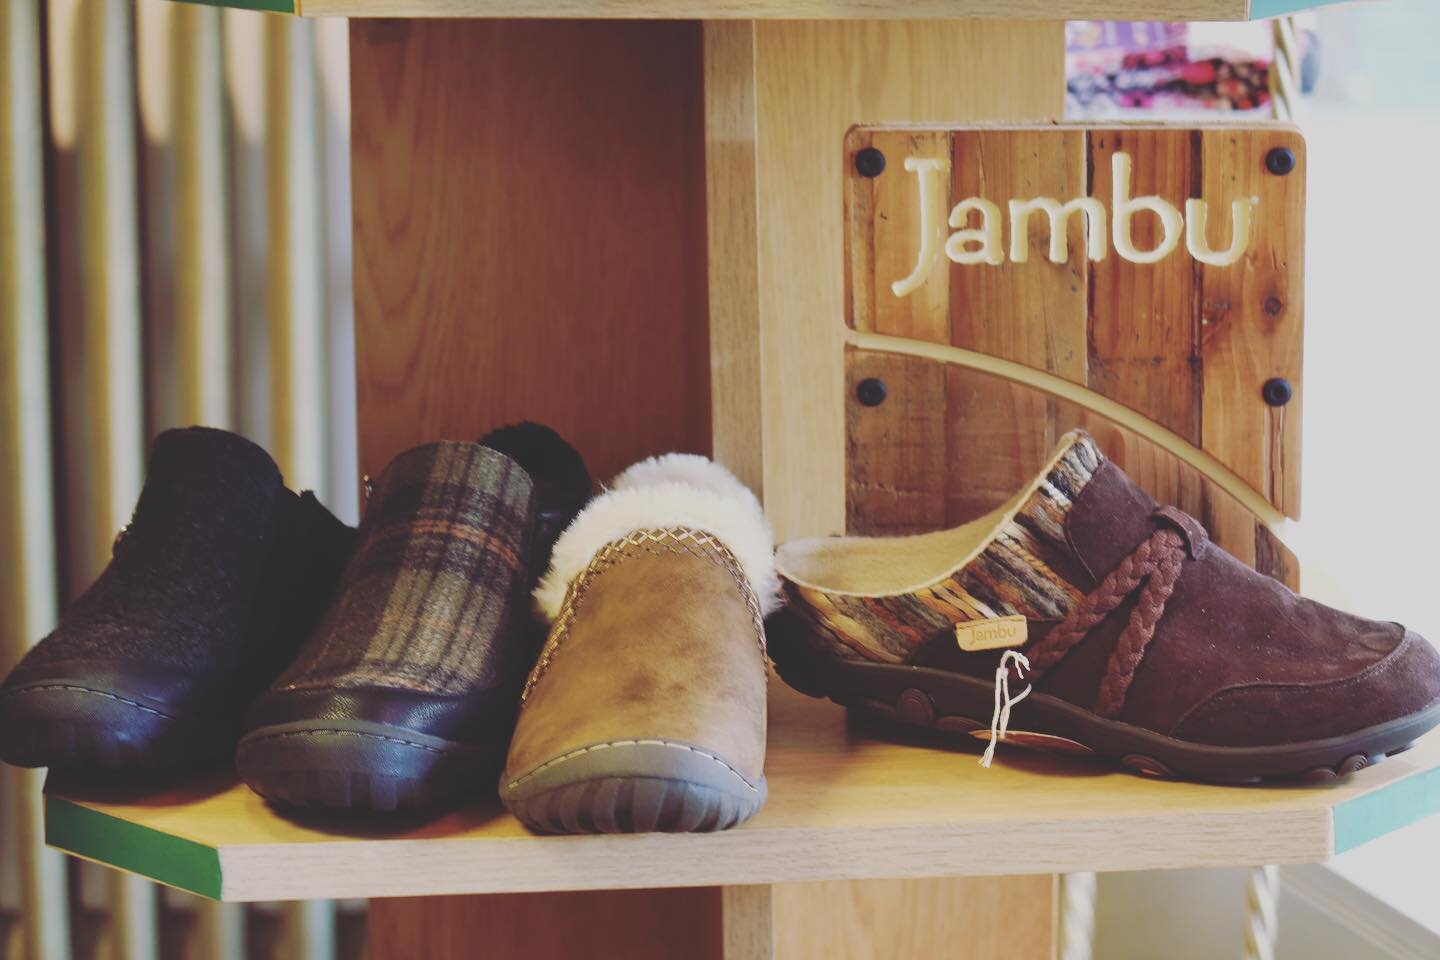 Let&rsquo;s get #cozy with @jambuandco slippers!